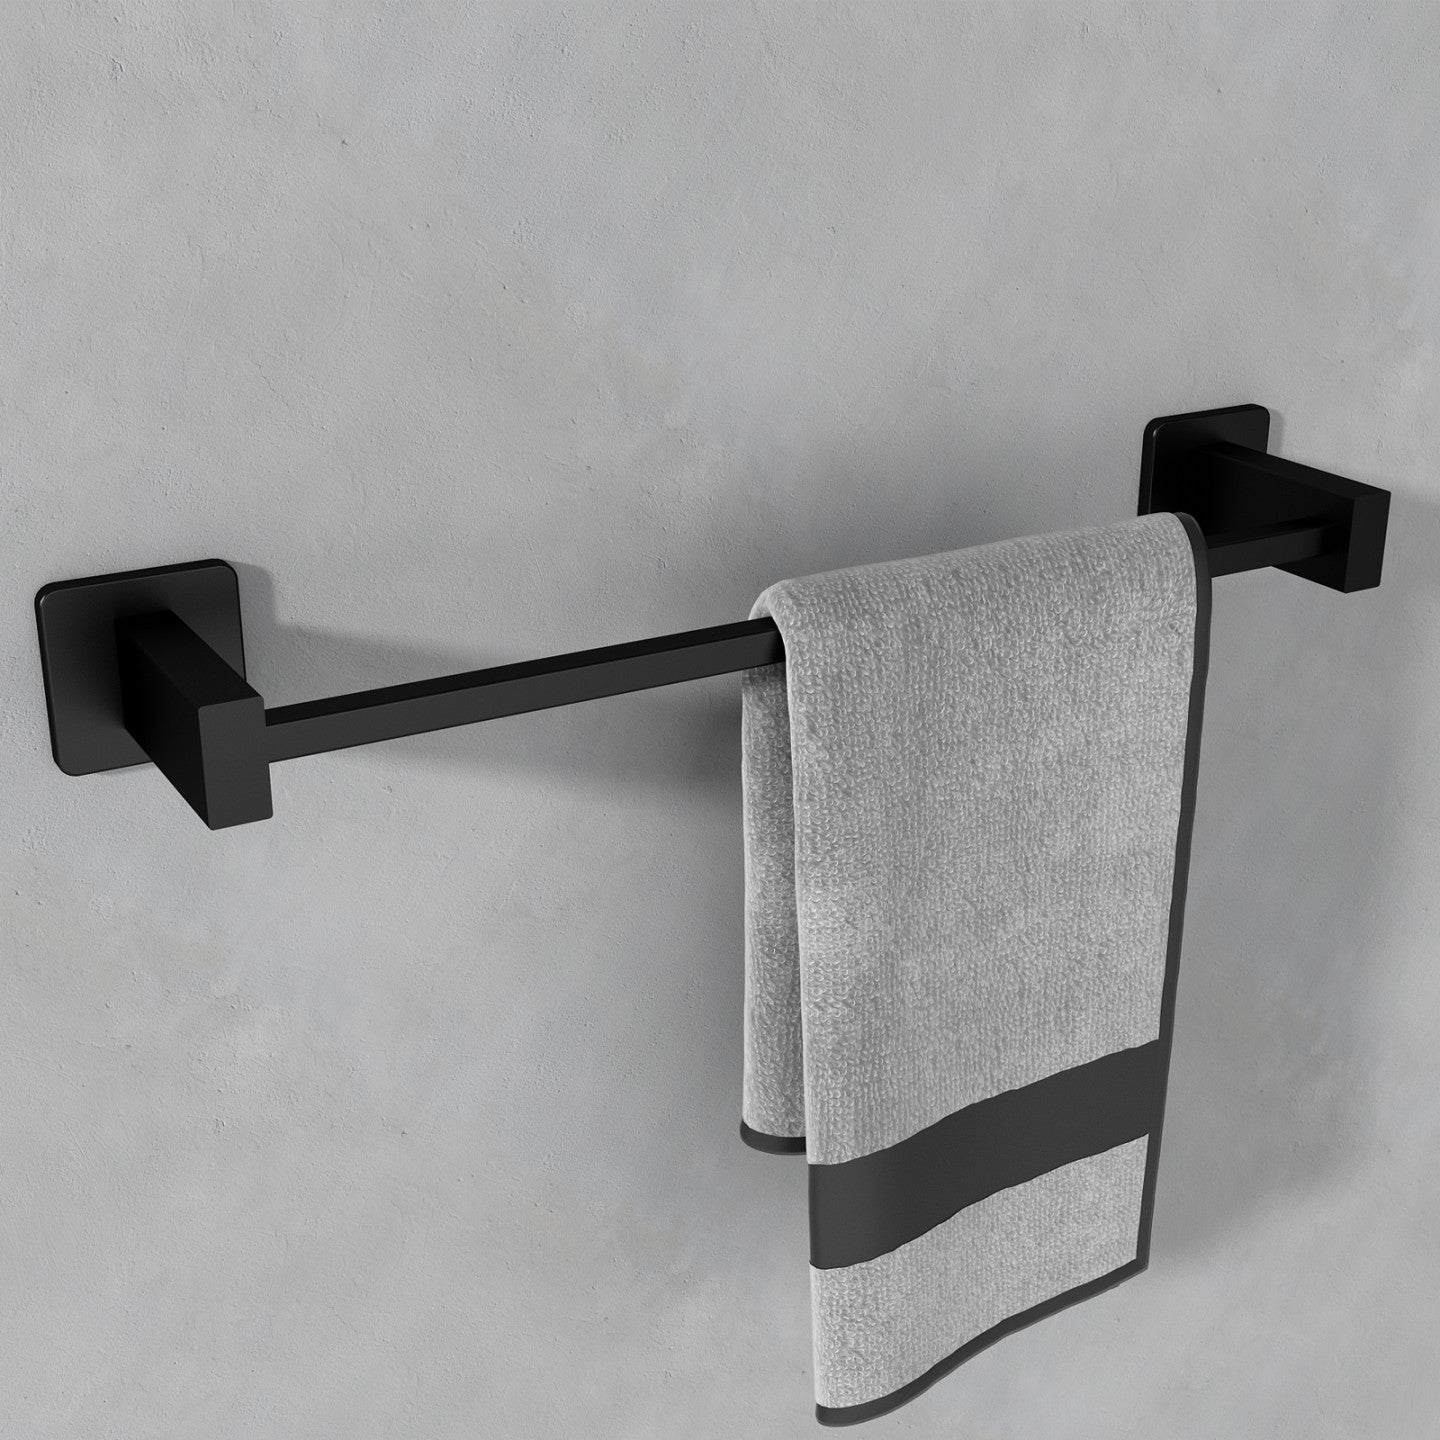 Elegant wall-mounted black towel bar with a plush grey towel, enhancing the functionality and style of a modern bathroom design